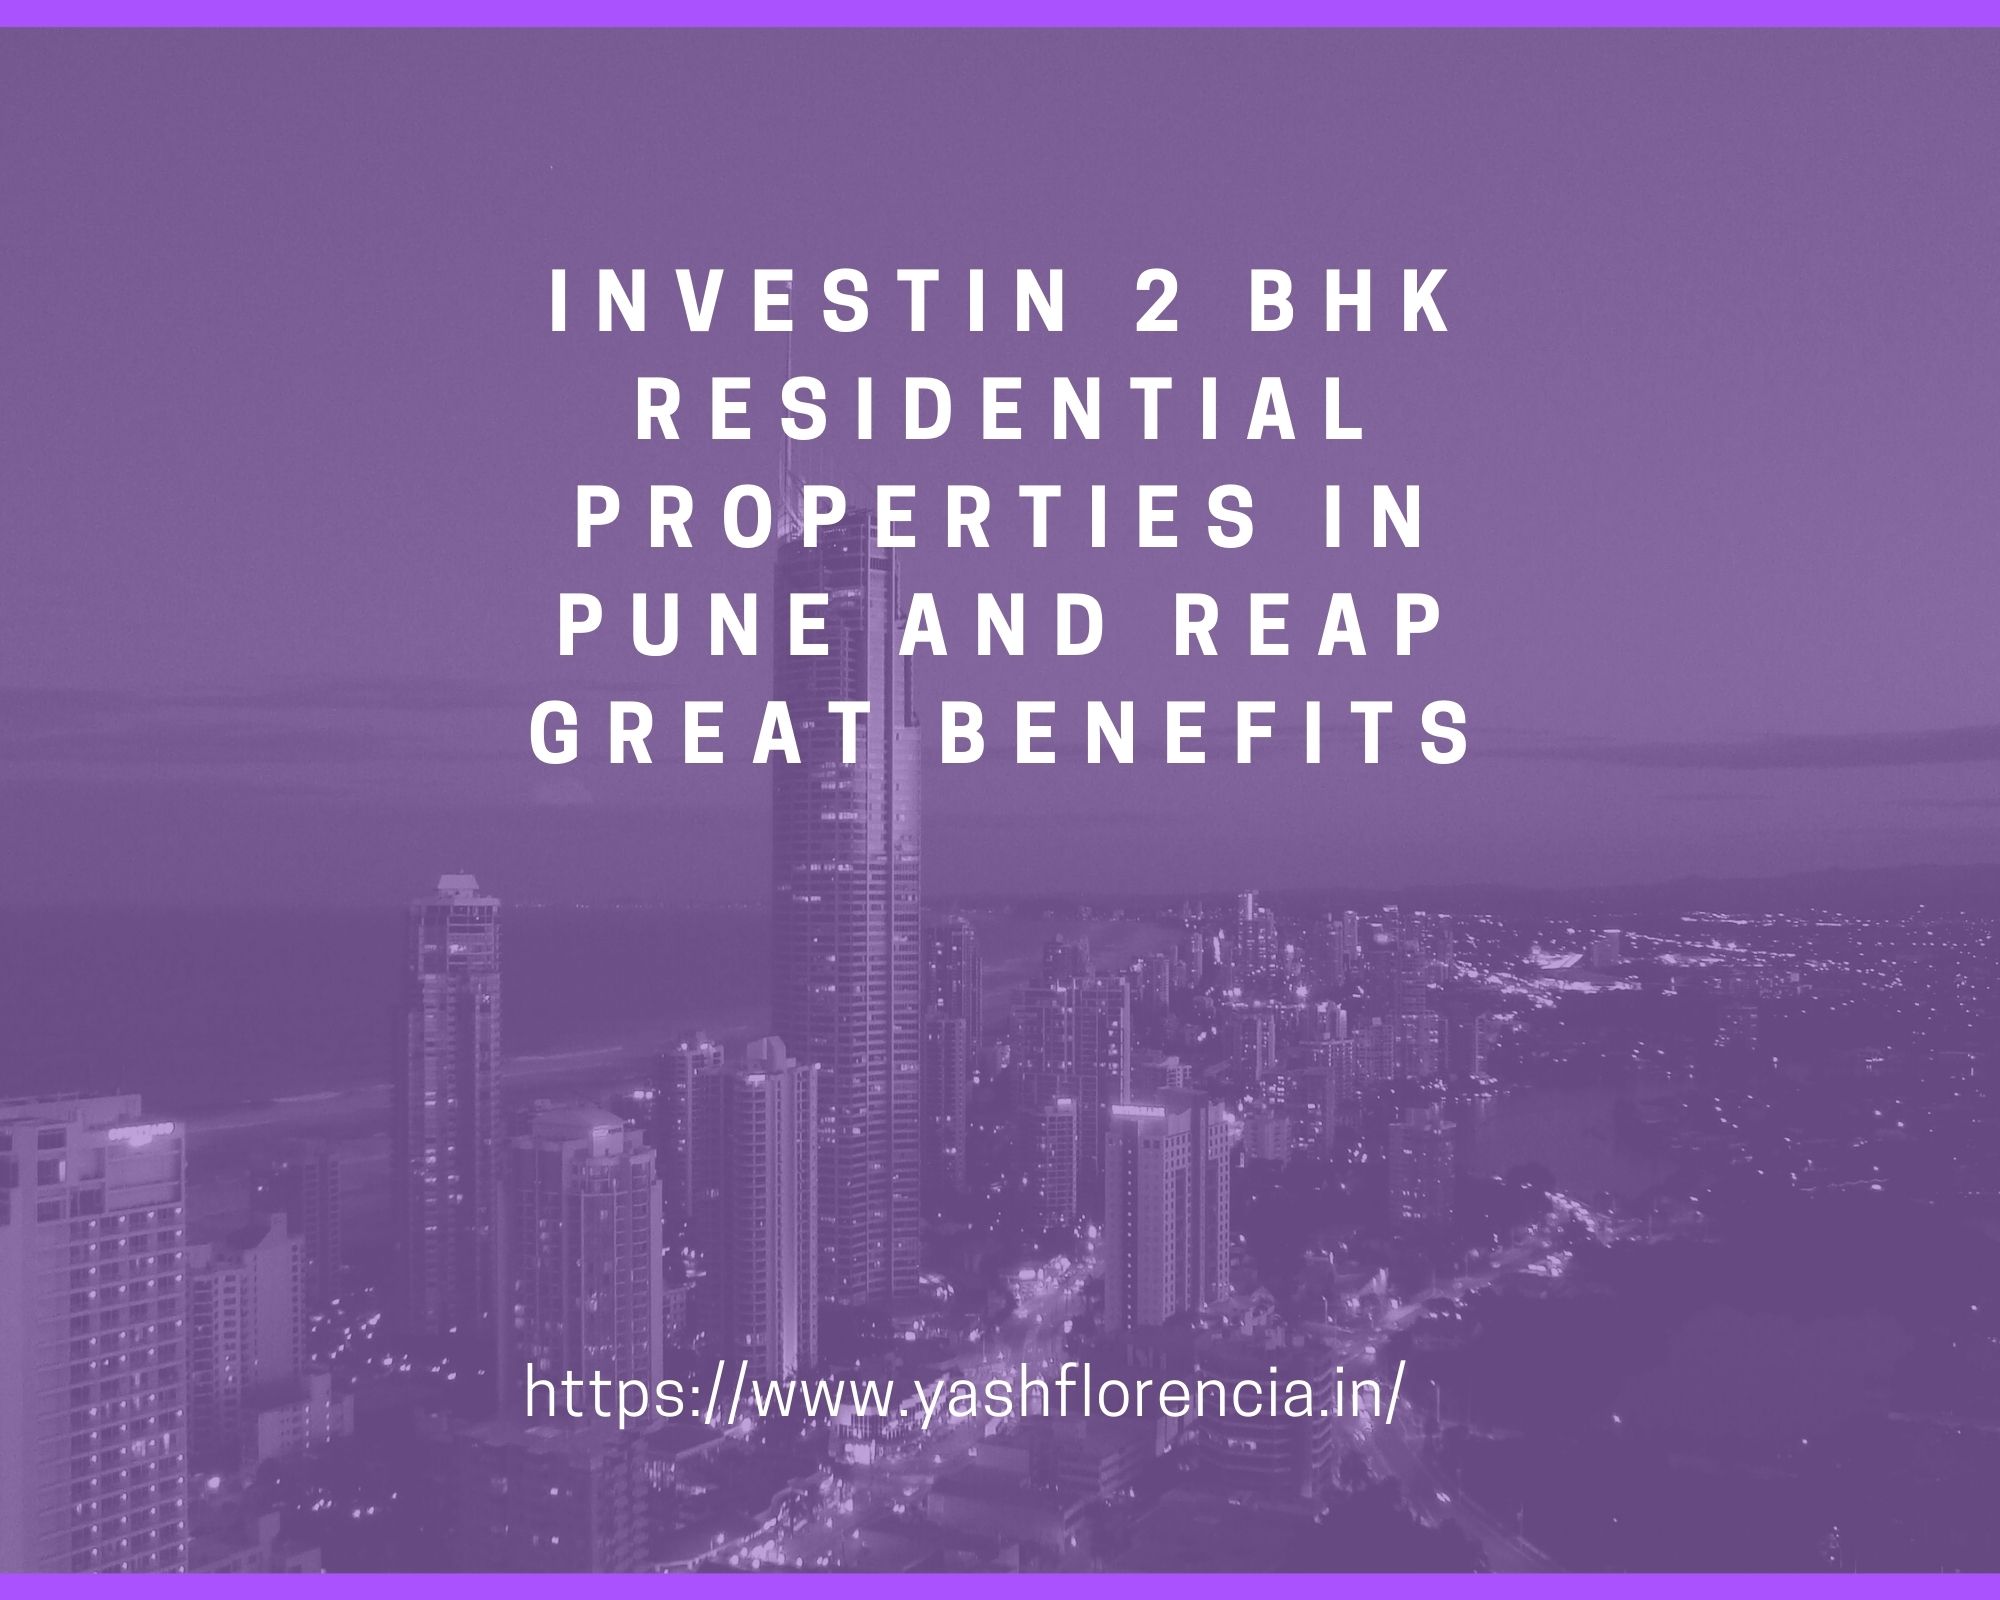 Investin 2 BHK residential properties in Pune and reap great benefits